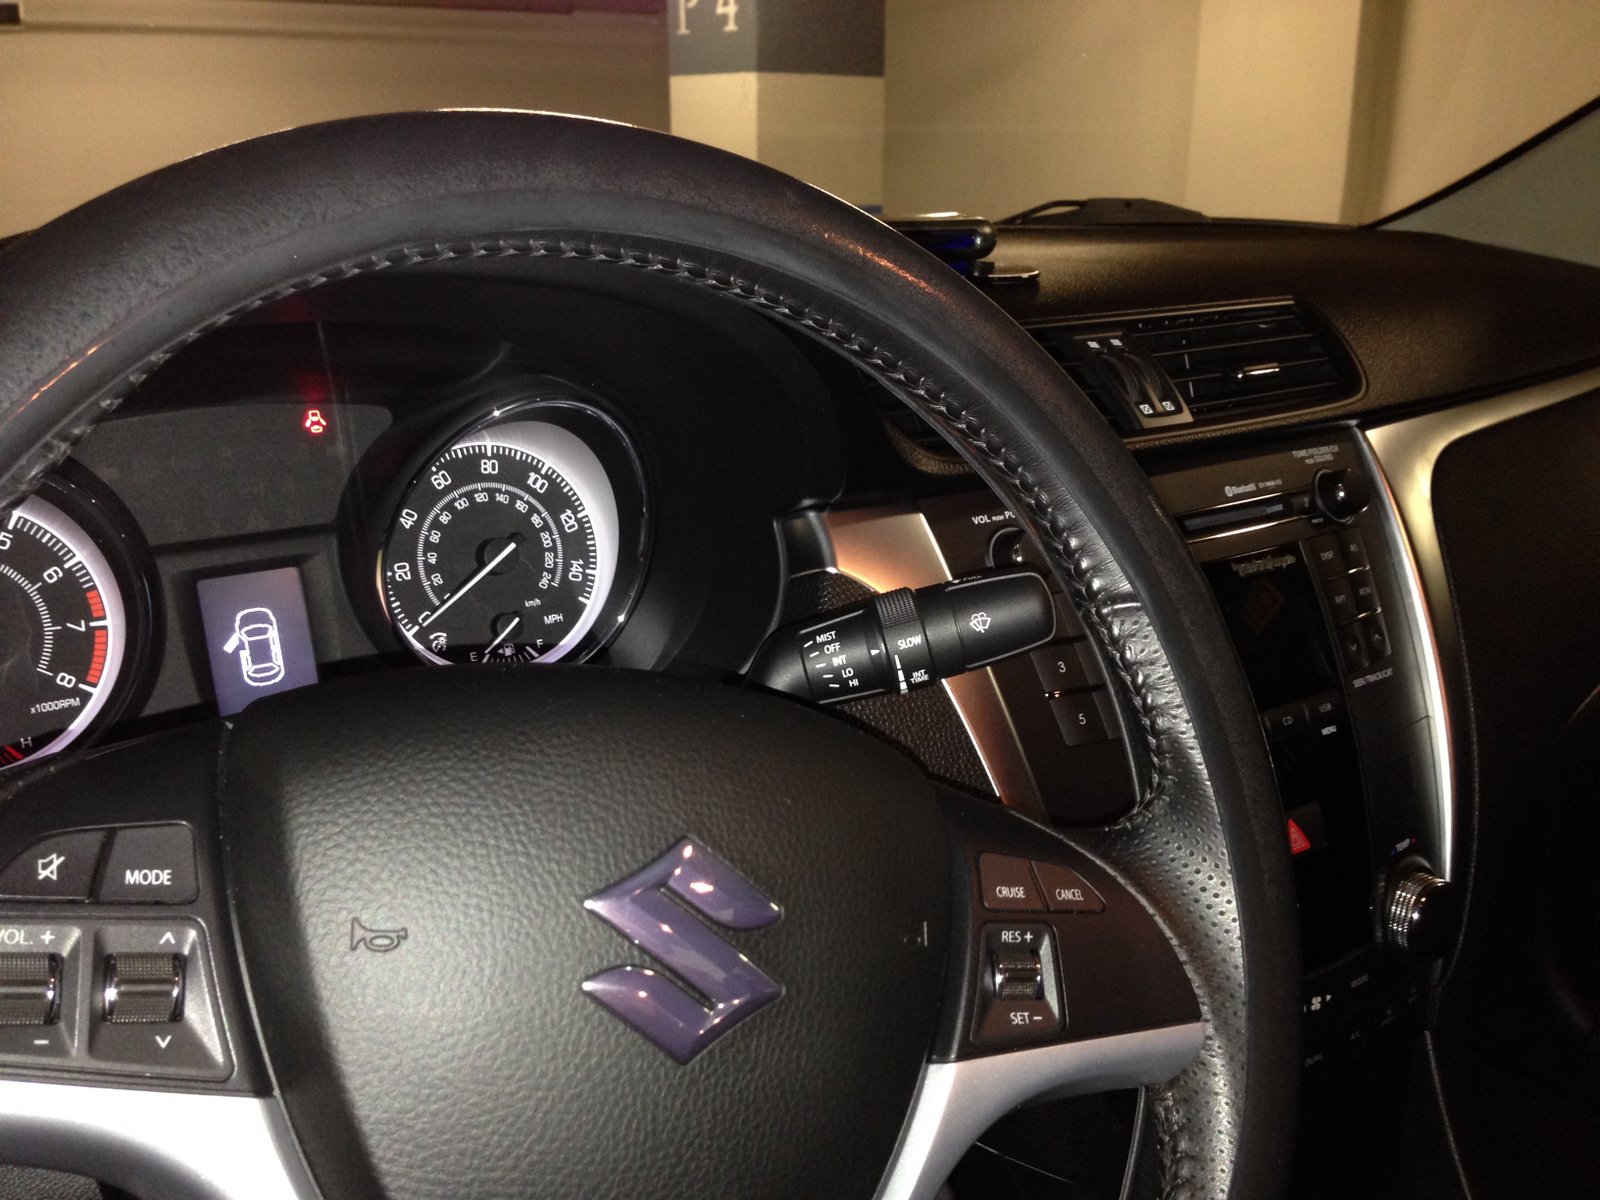 JDM silicone steering wheel cover.